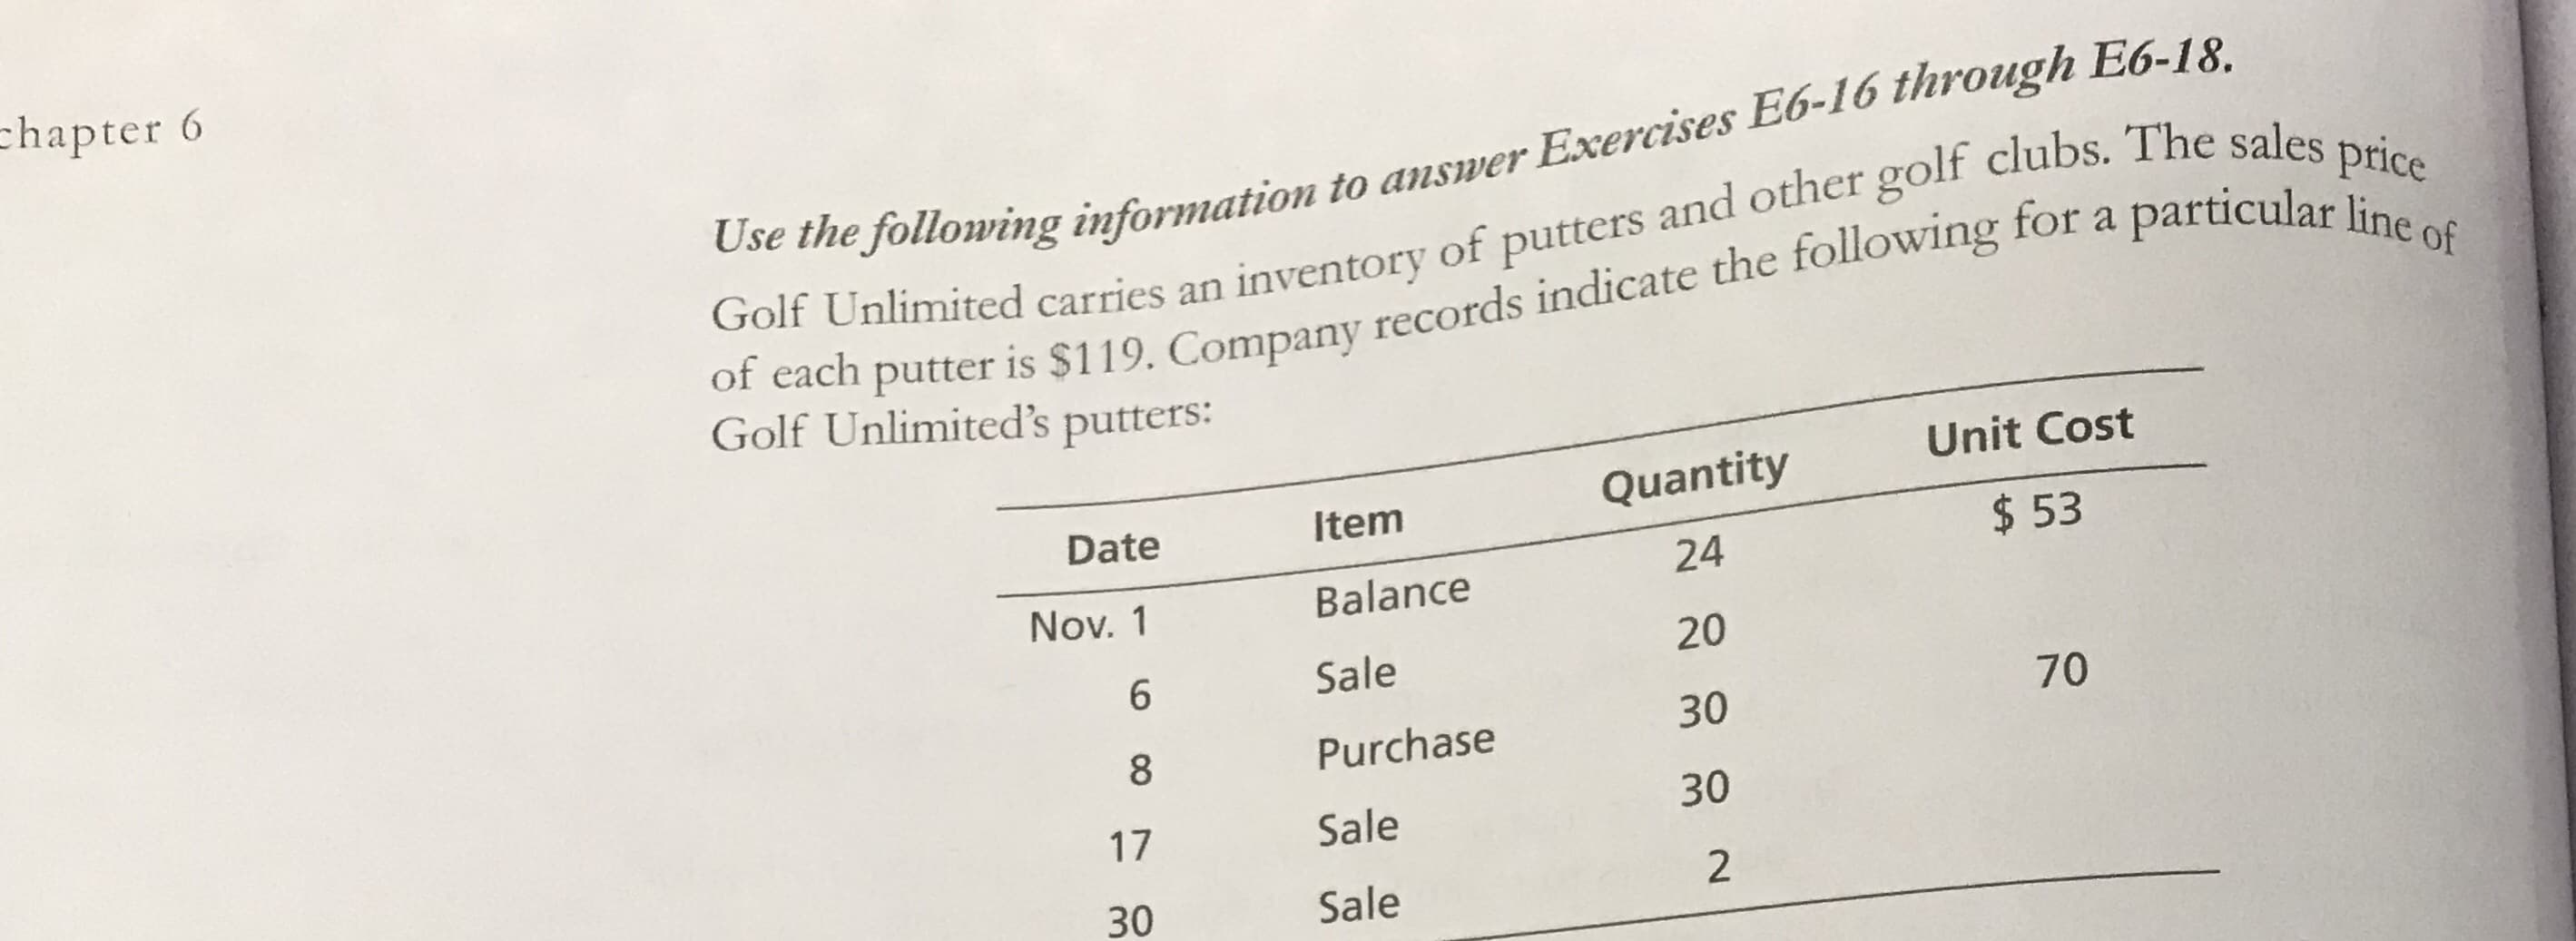 ese he following information to answer Exercises
Golf Unlimited carries an inventory of putters and other golf clubs. The sales price
of each putter is $119. Company records indicate the following for a particular line of
Golf Unlimited's putters:
Unit Cost
Item
Quantity
Date
24
$ 53
Nov. 1
Balance
Sale
20
70
